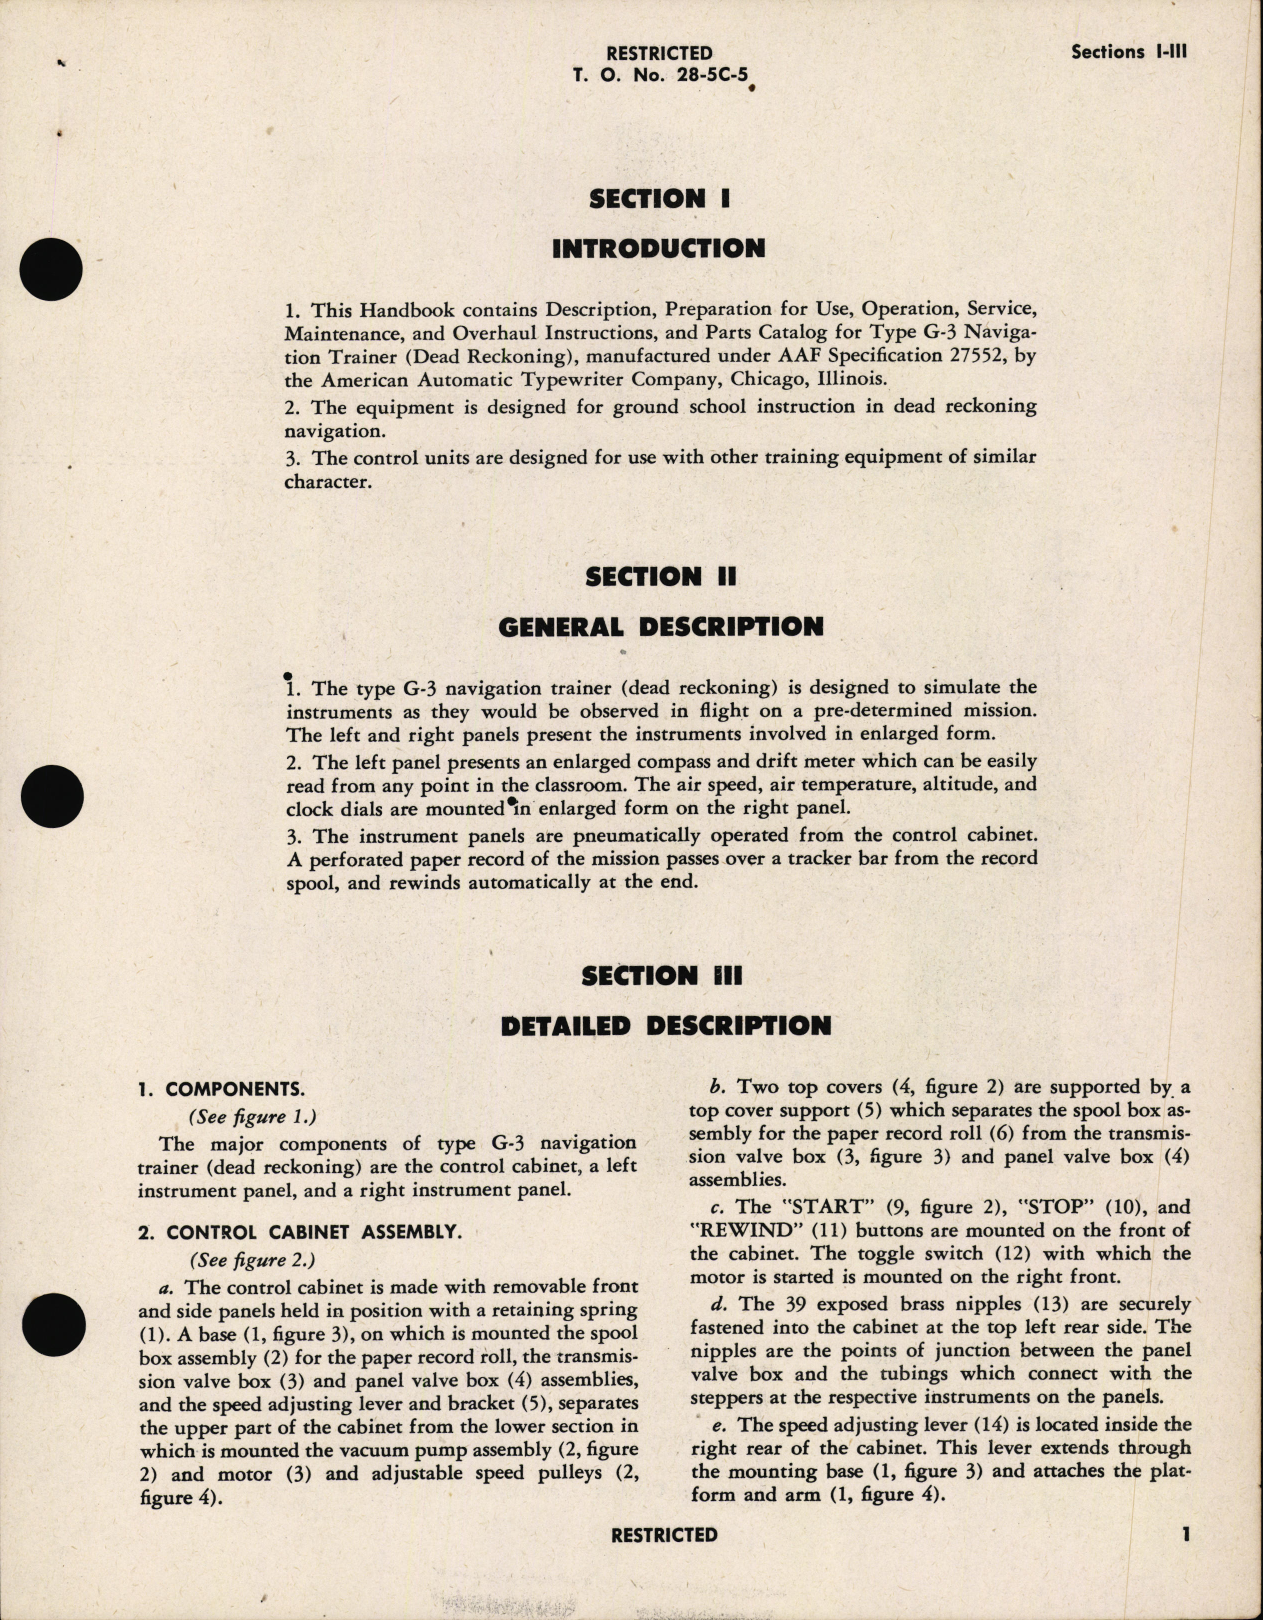 Sample page 5 from AirCorps Library document: Operation, Service and Overhaul Instructions with Parts Catalog for Navigation dead Reckoning Trainer Type G-3